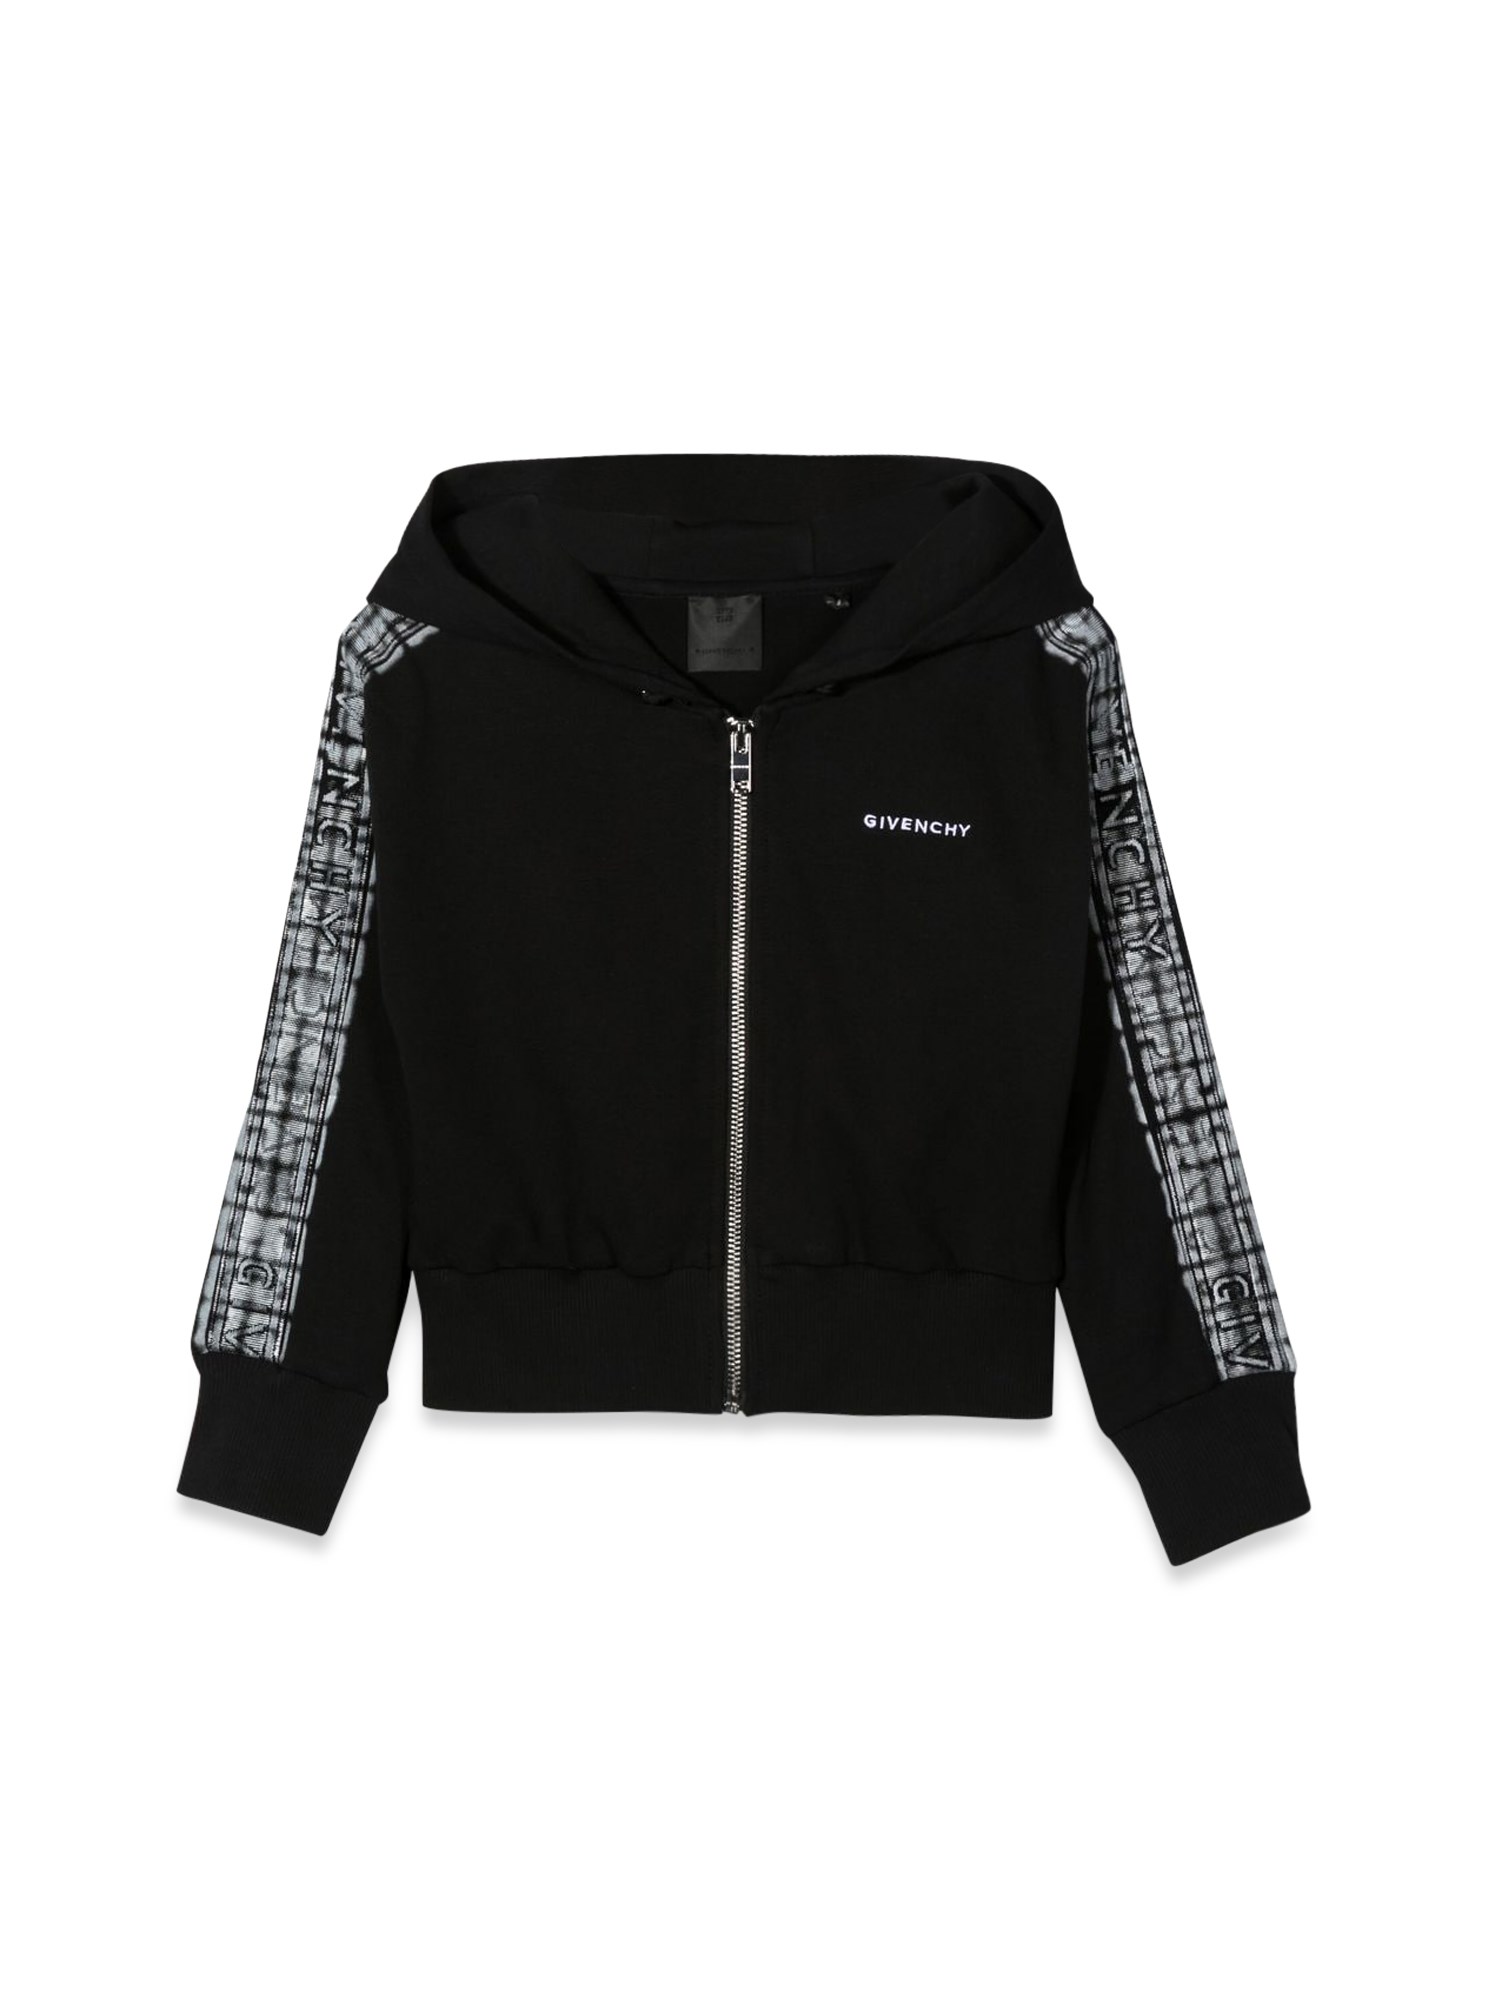 givenchy cardigan with hood and zipper logo band on sleeves